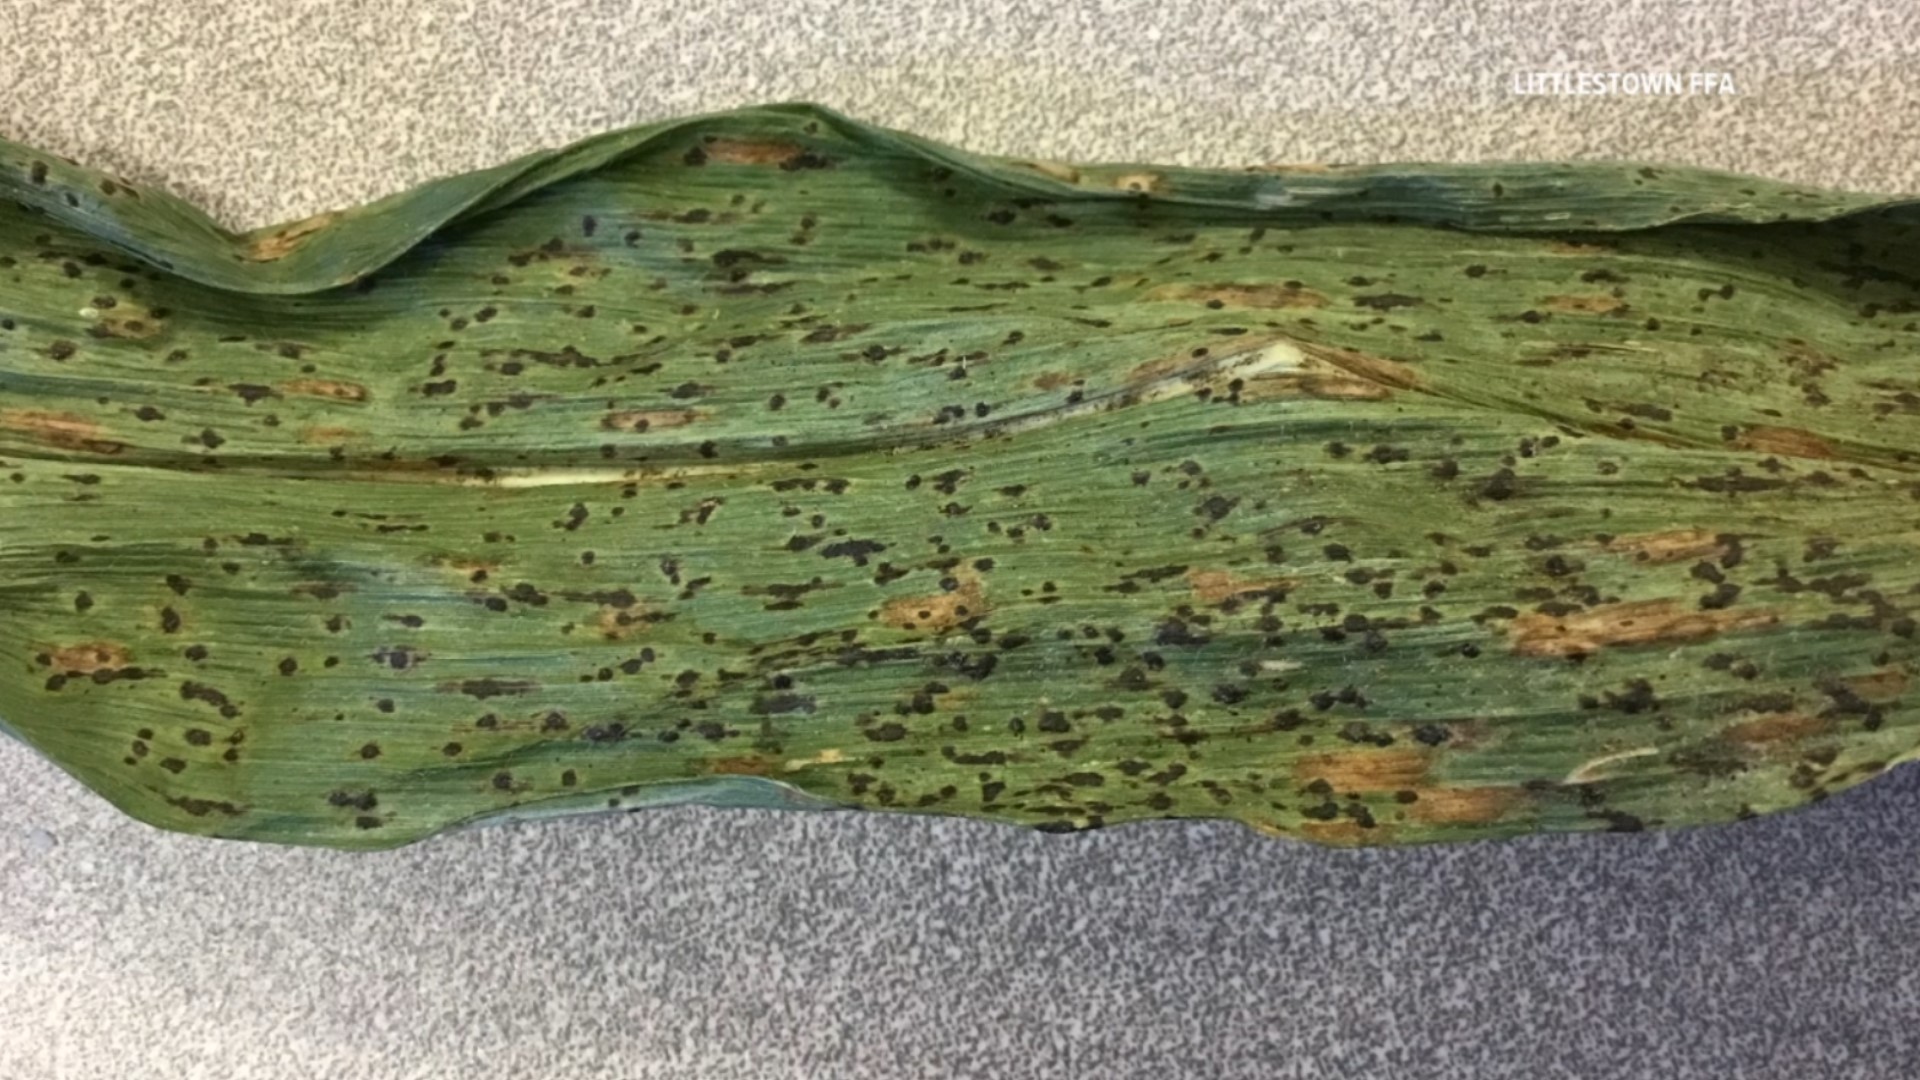 “Tar spot,” an invasive fungal disease of corn, is expected to expand across Pennsylvania in the coming corn season.